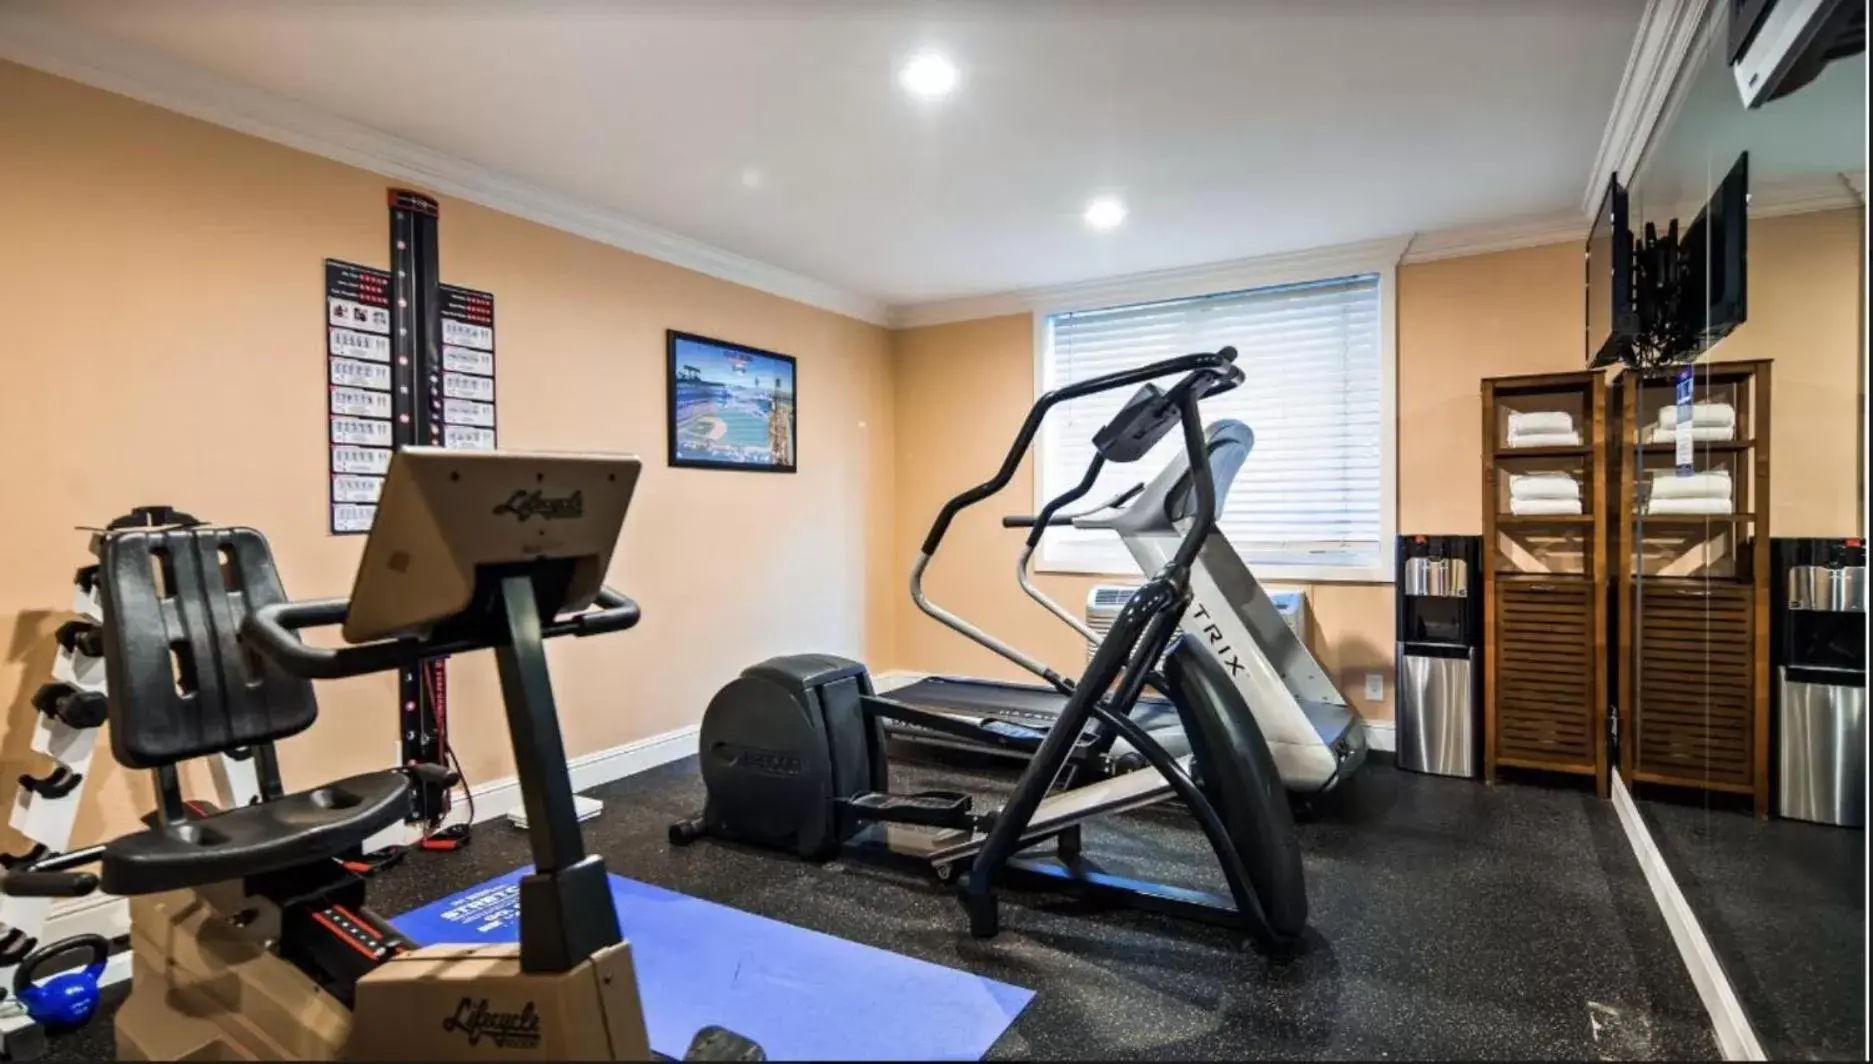 Fitness centre/facilities, Fitness Center/Facilities in Best Western Plus Airport Plaza